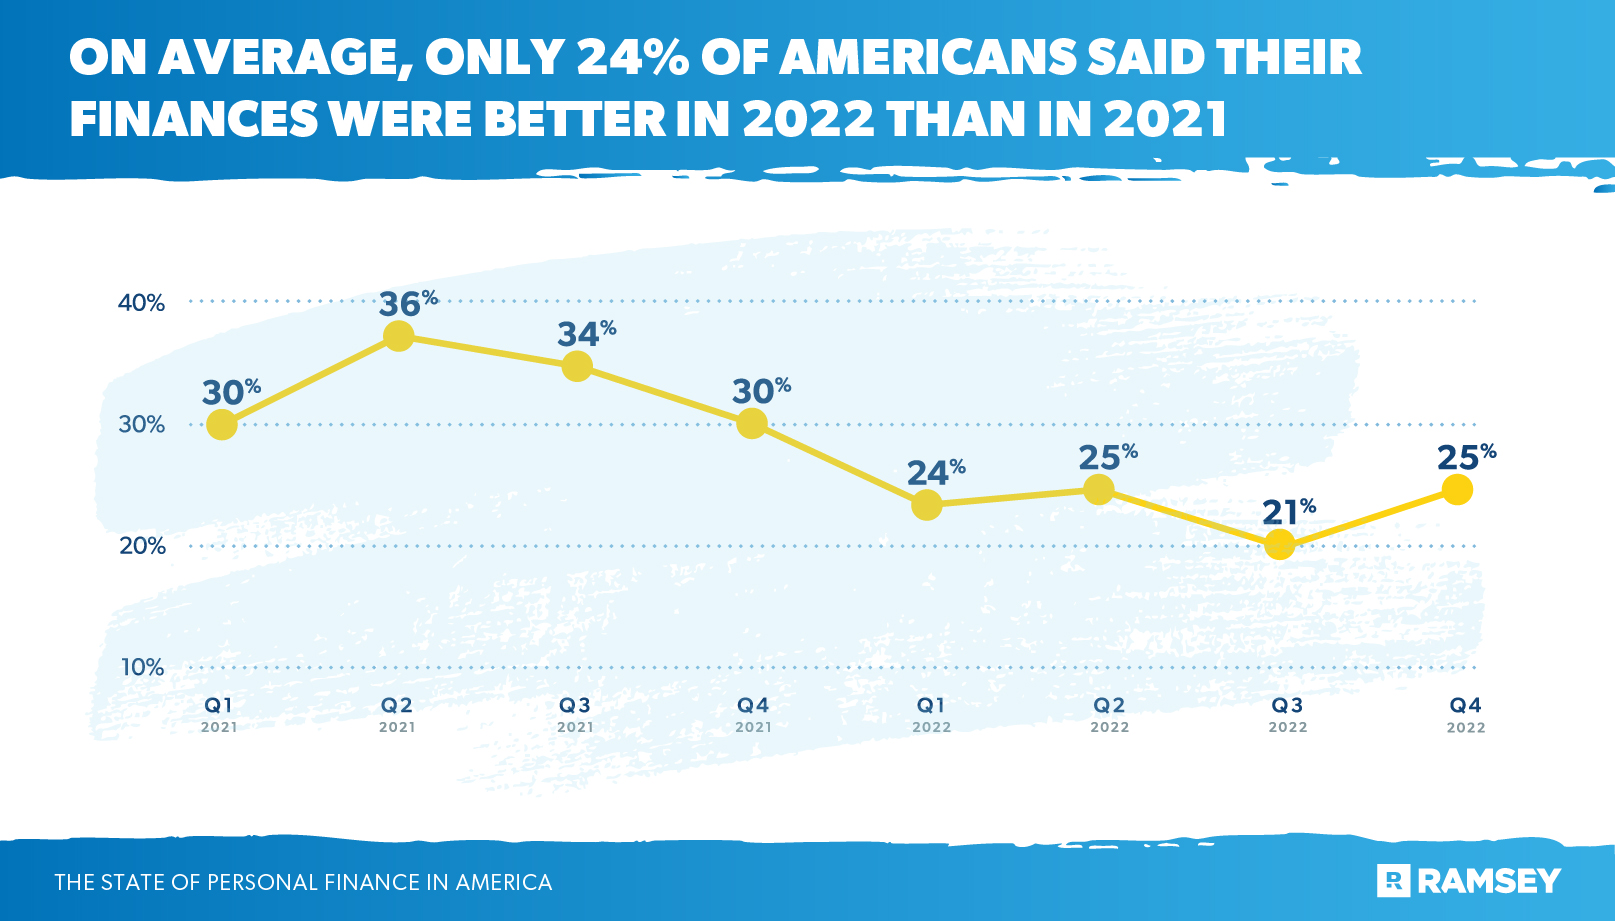 on average, only 24% of Americans said their finances were better in 2022 than 2021